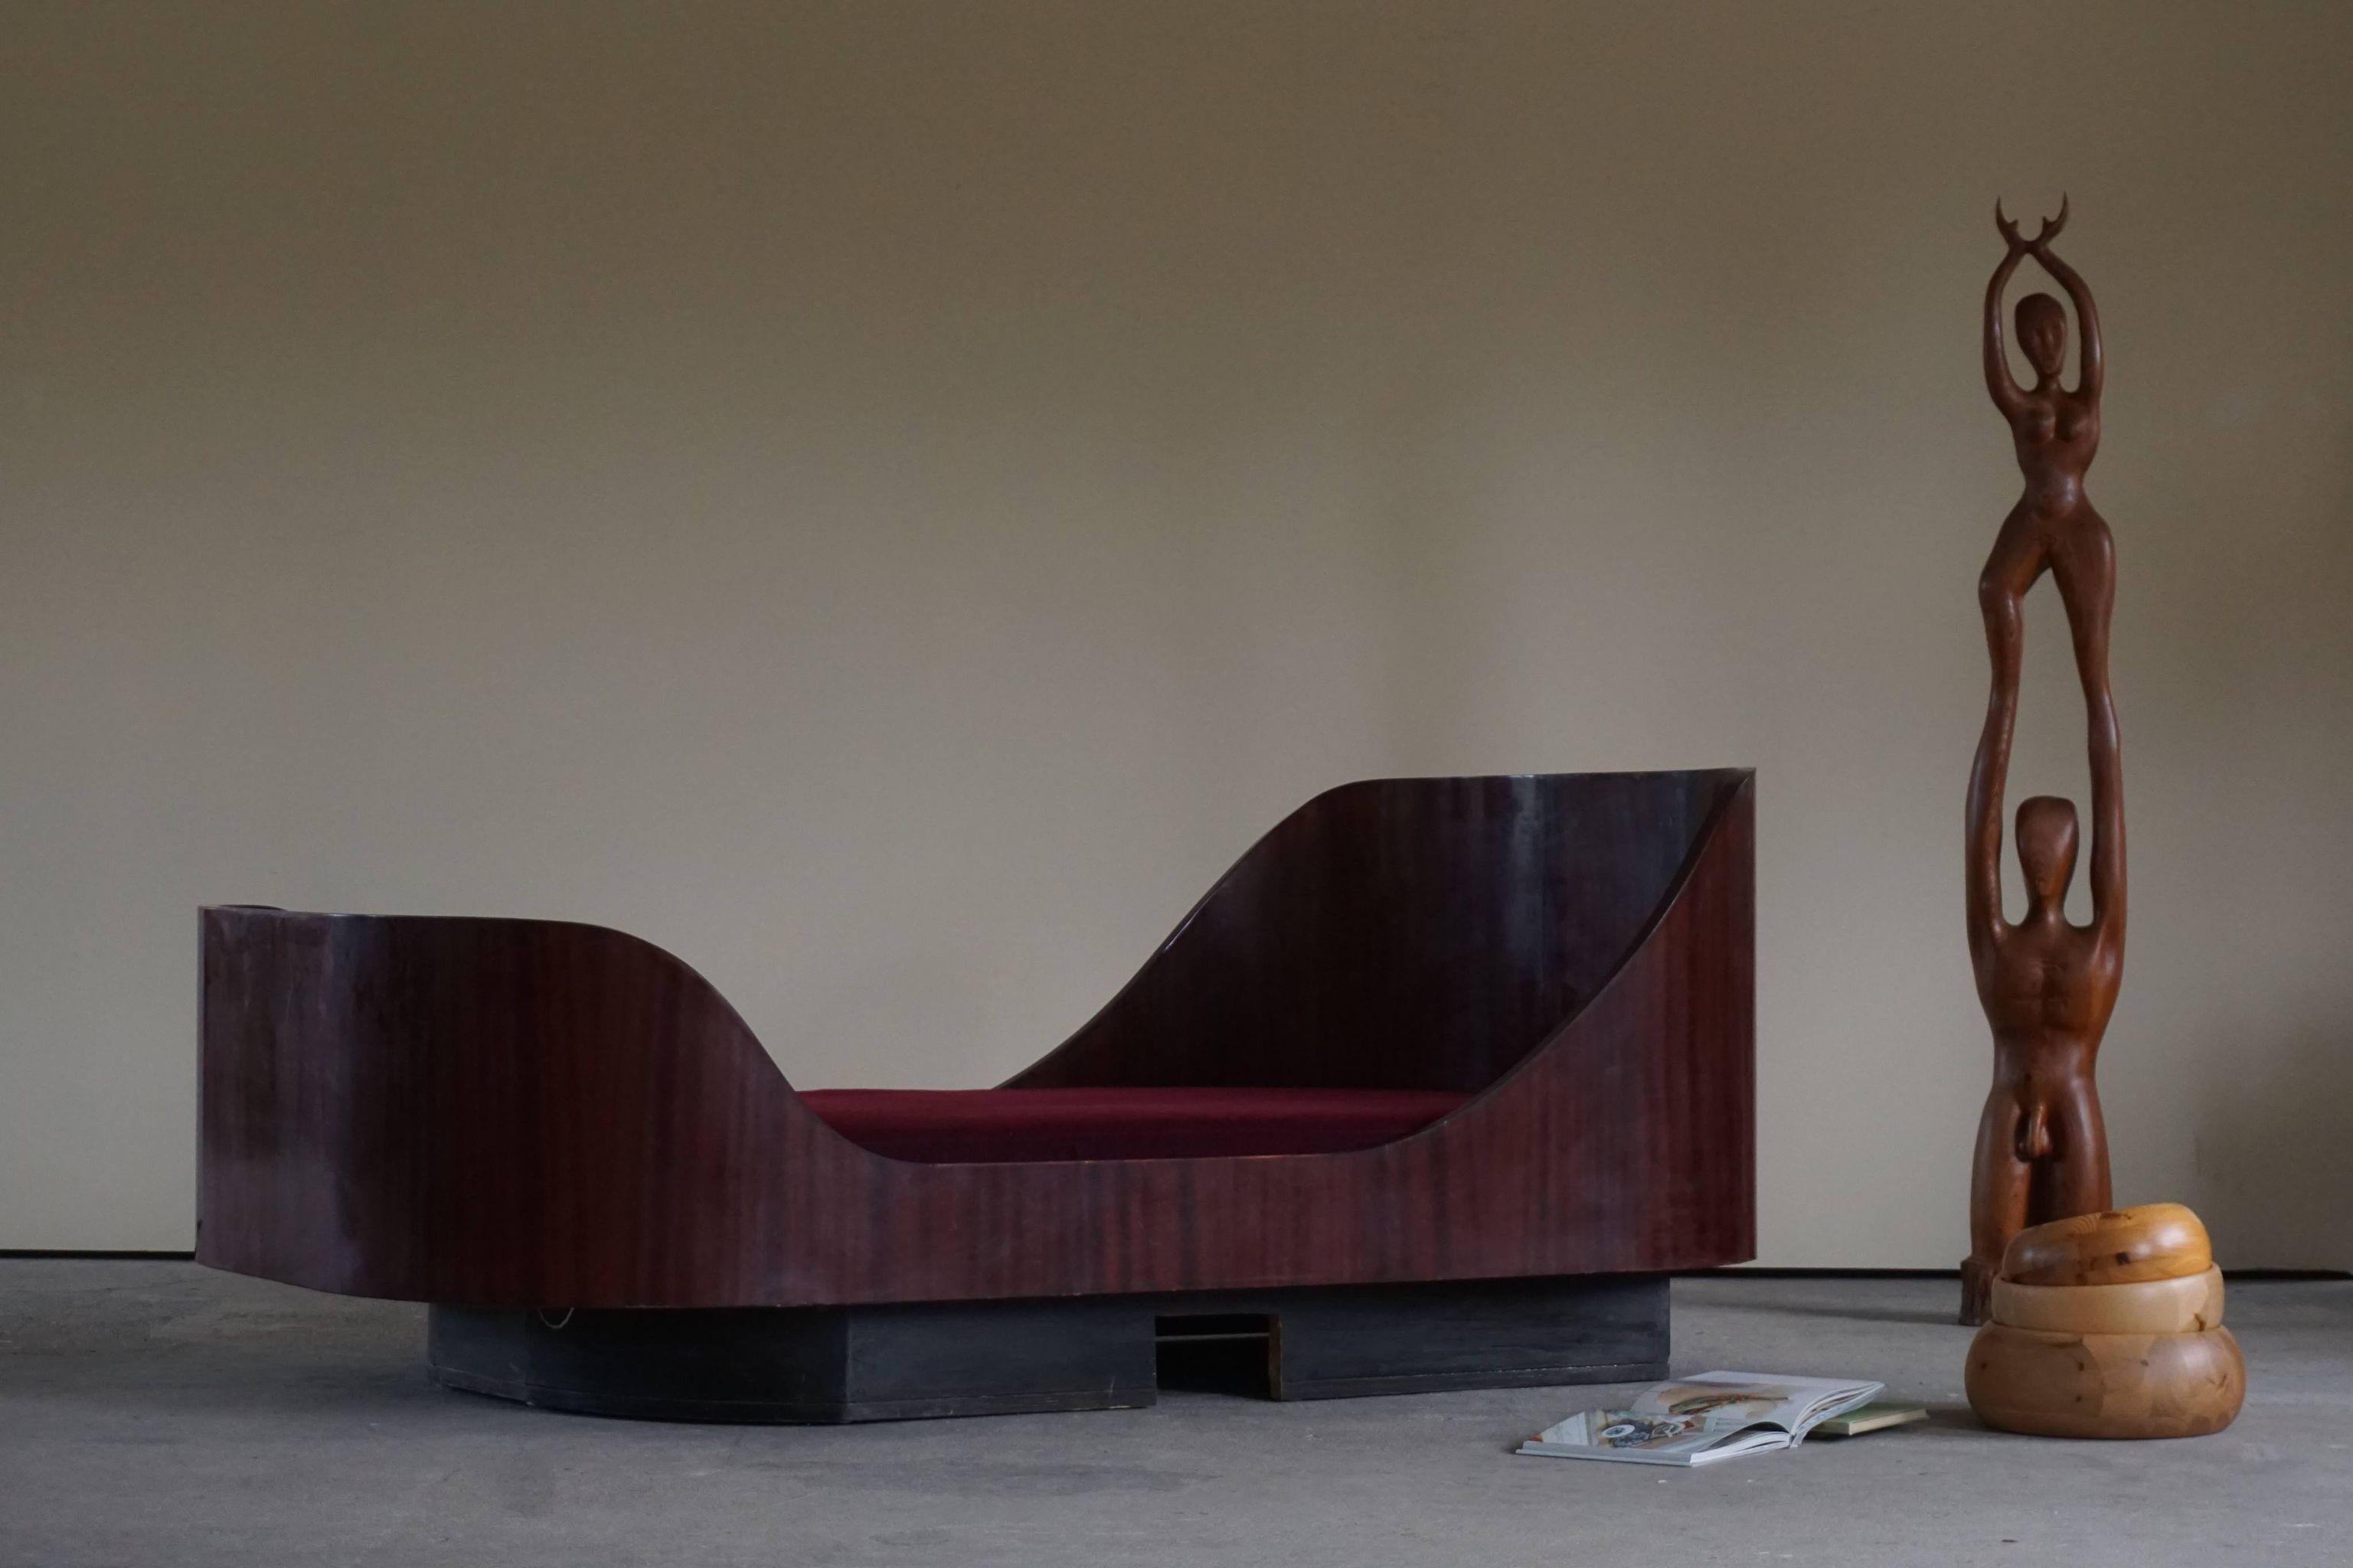 Sculptural Scandinavian art deco bed / daybed in mahogany, 1940s. Such great lines in this vintage piece.
Perfect for a quick rest.